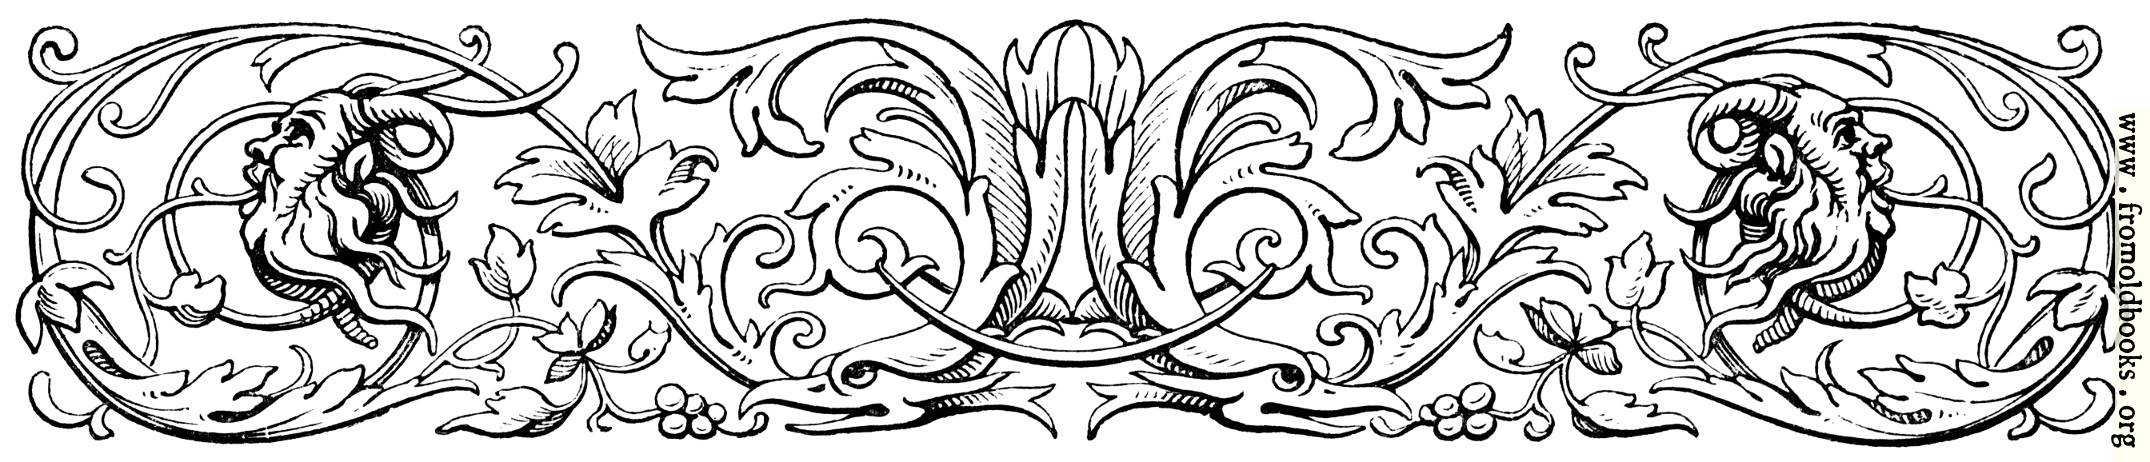 [Picture: Decorative chapter head with styilized birds and green men]